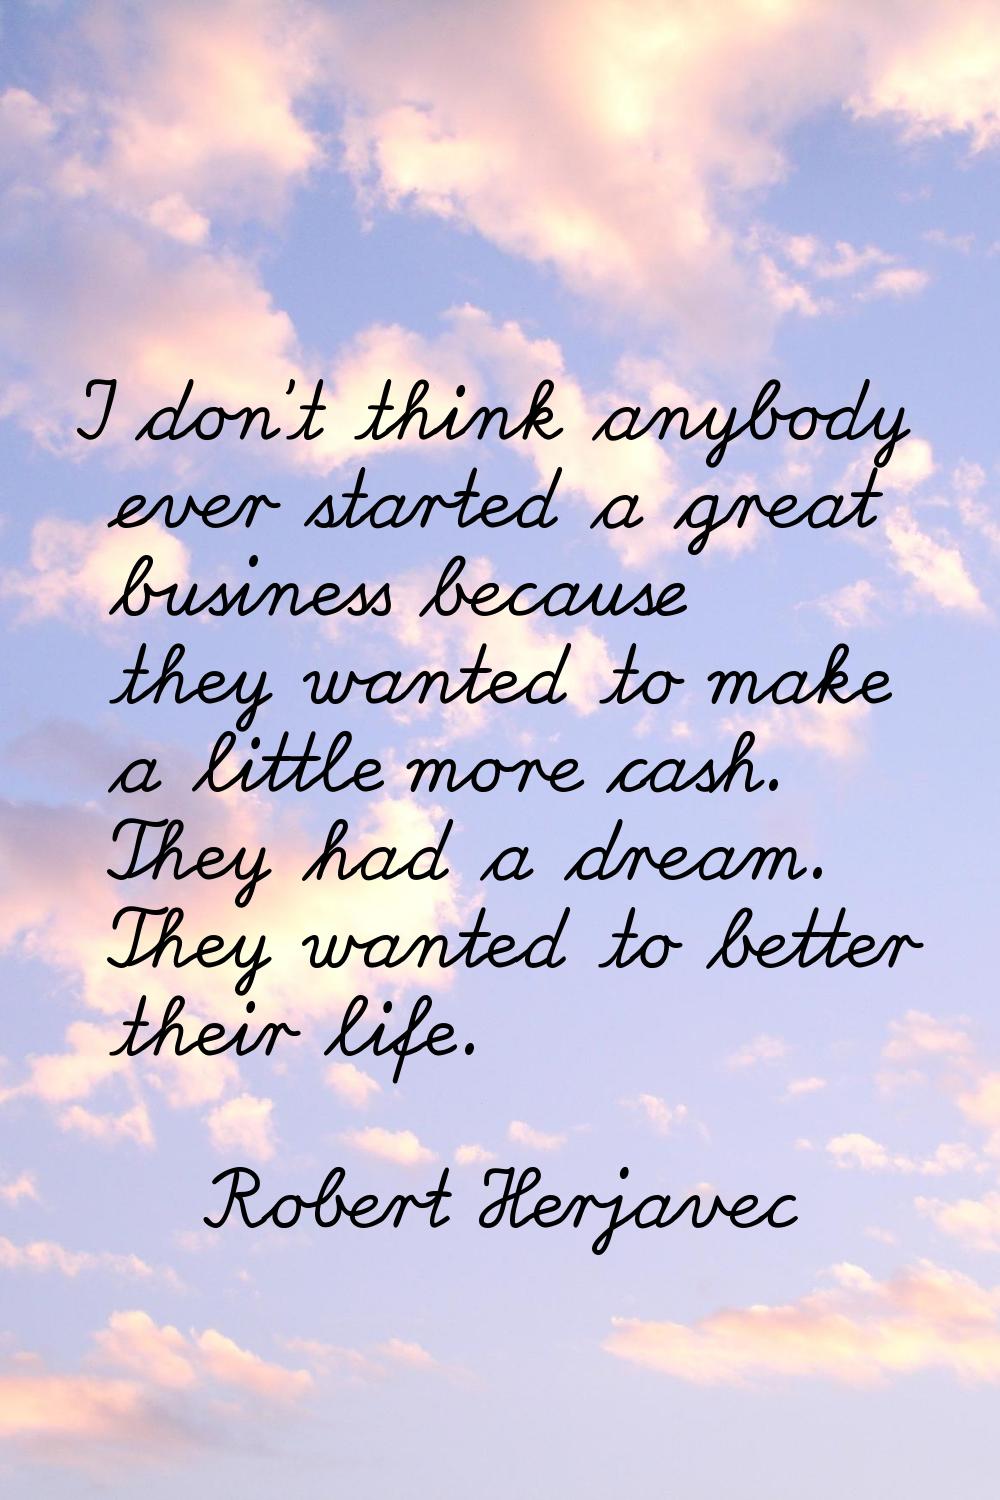 I don't think anybody ever started a great business because they wanted to make a little more cash.